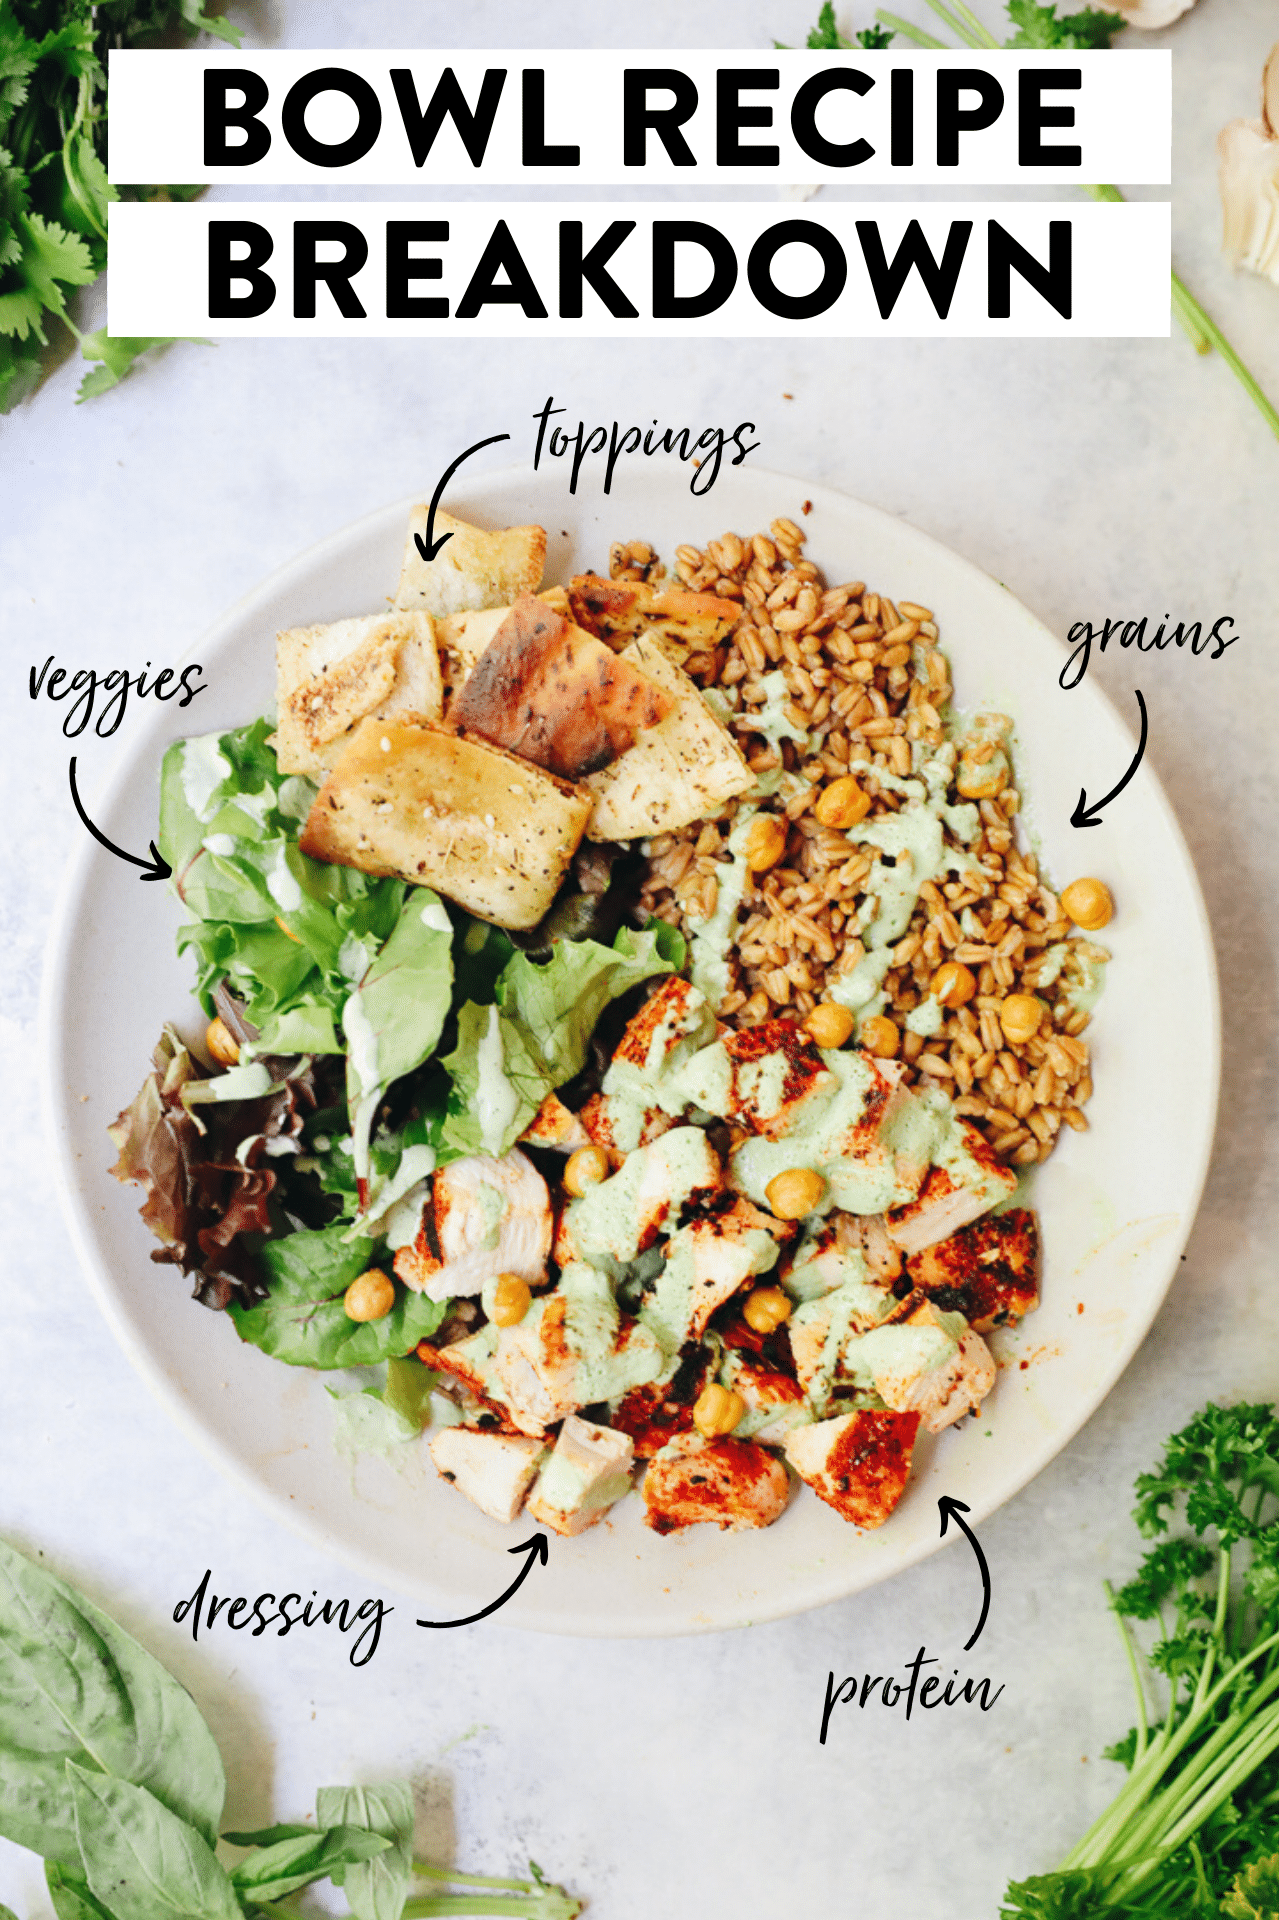 Picture with the title "bowl recipe breakdown" overlaying the image. Bowl labeled with grains, protein, dressing, veggies and toppings. 